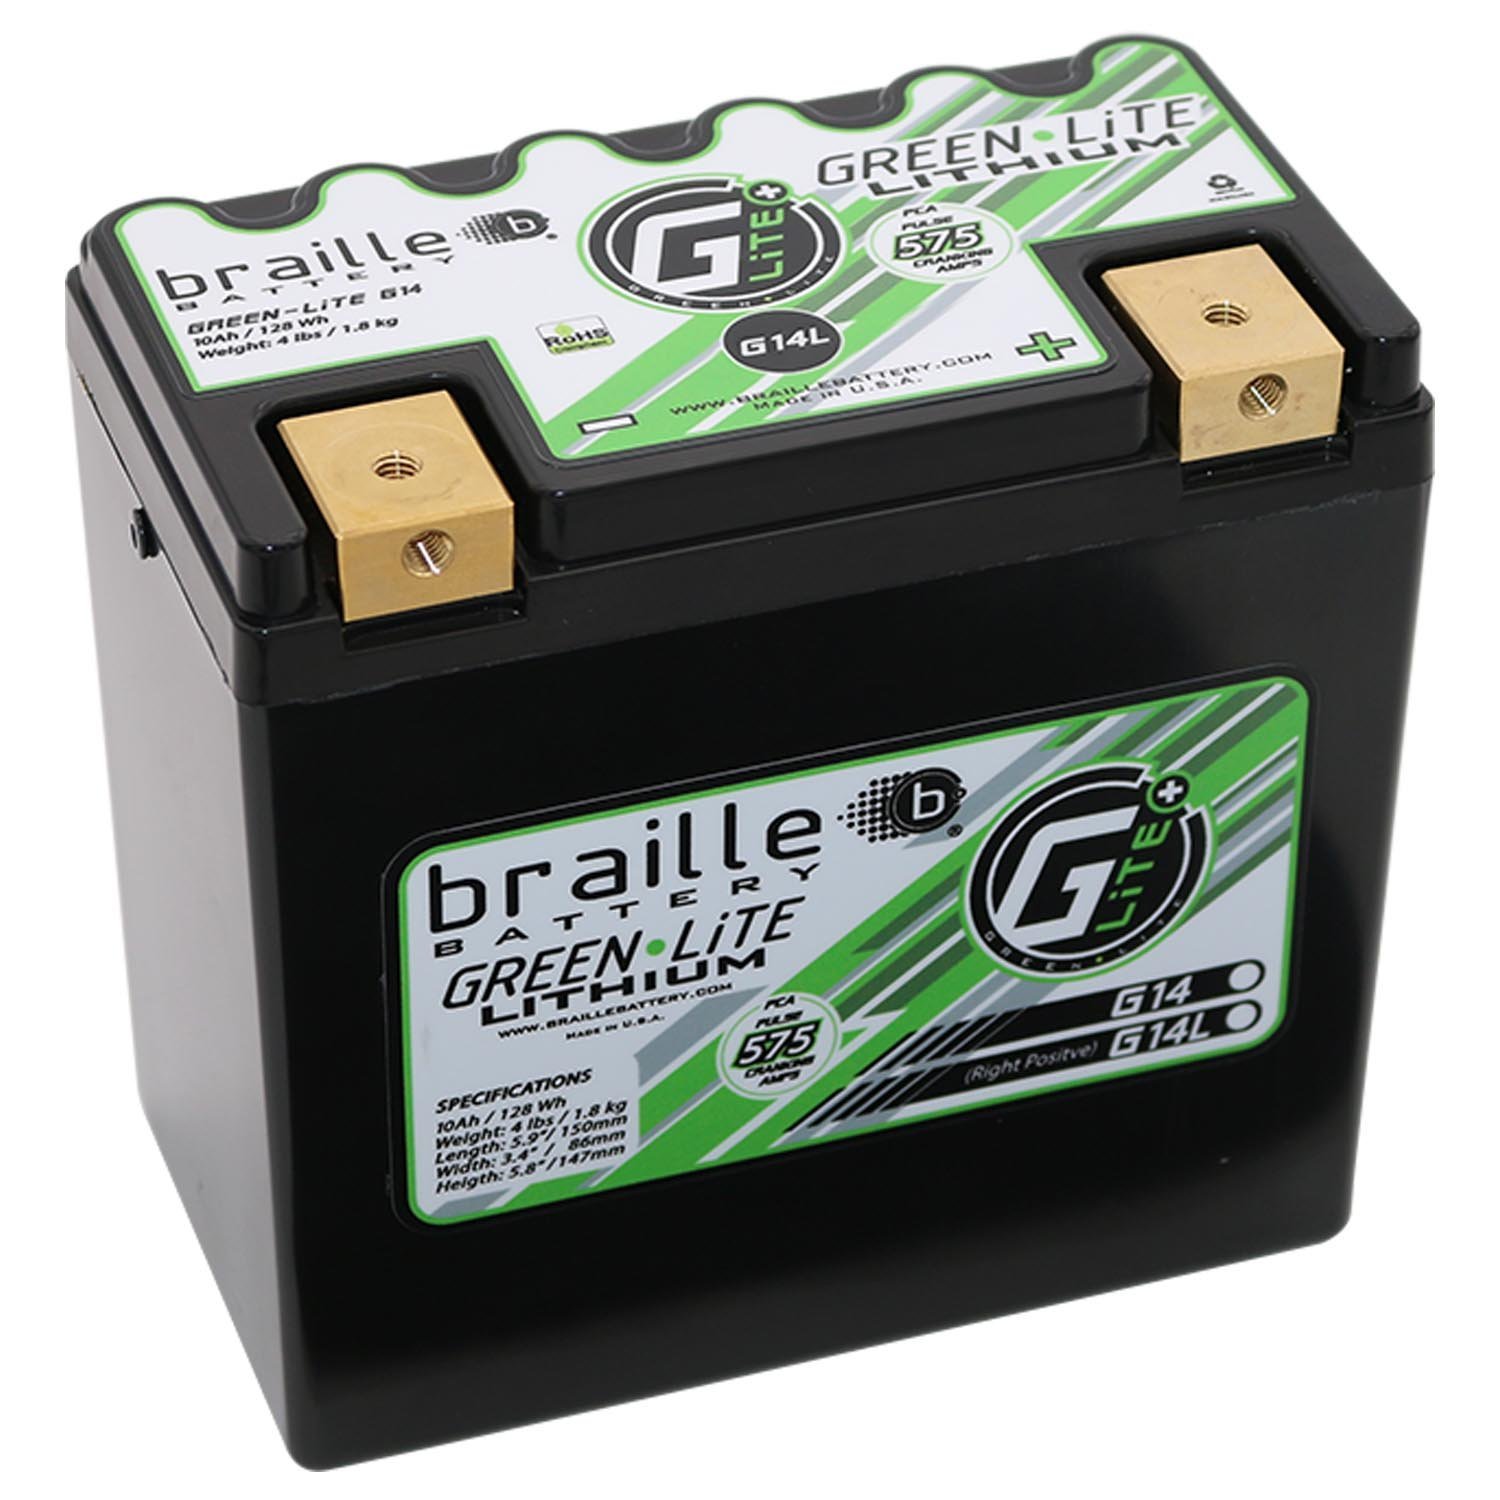 Green-Lite Lithium-Ion 12 V Powersports Battery, BCI Group: